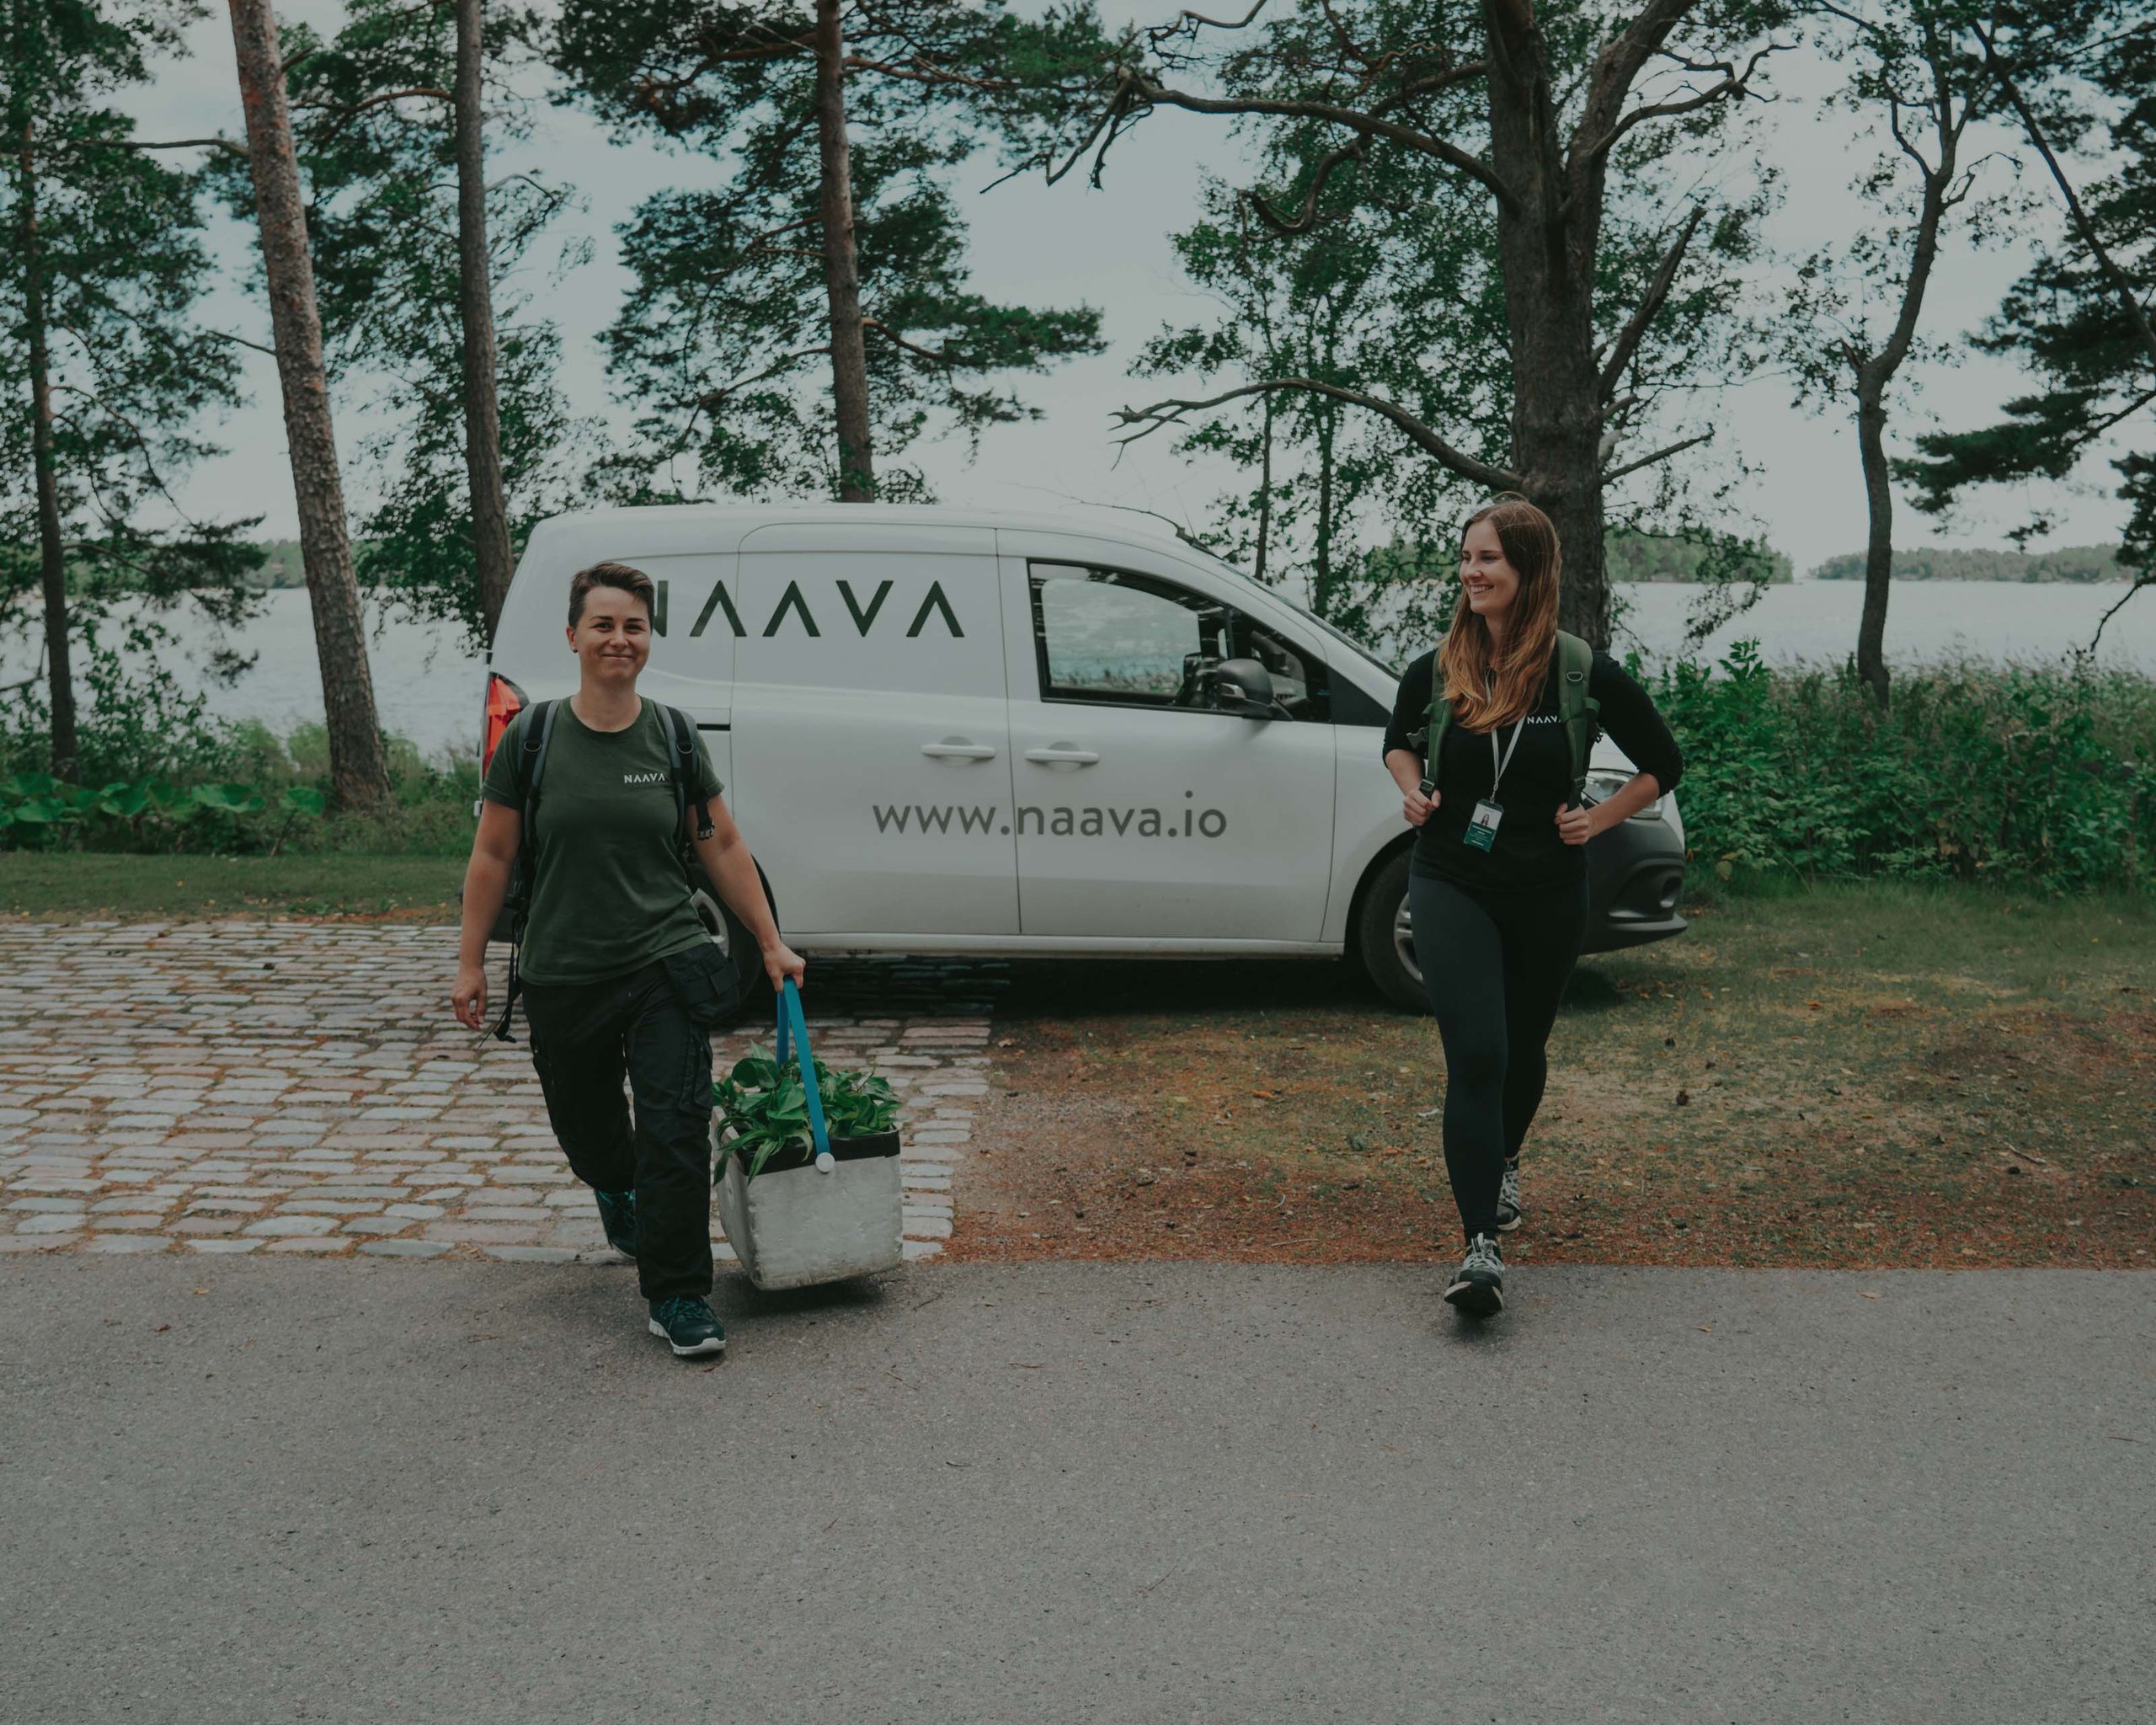 Naava Service team on a mission